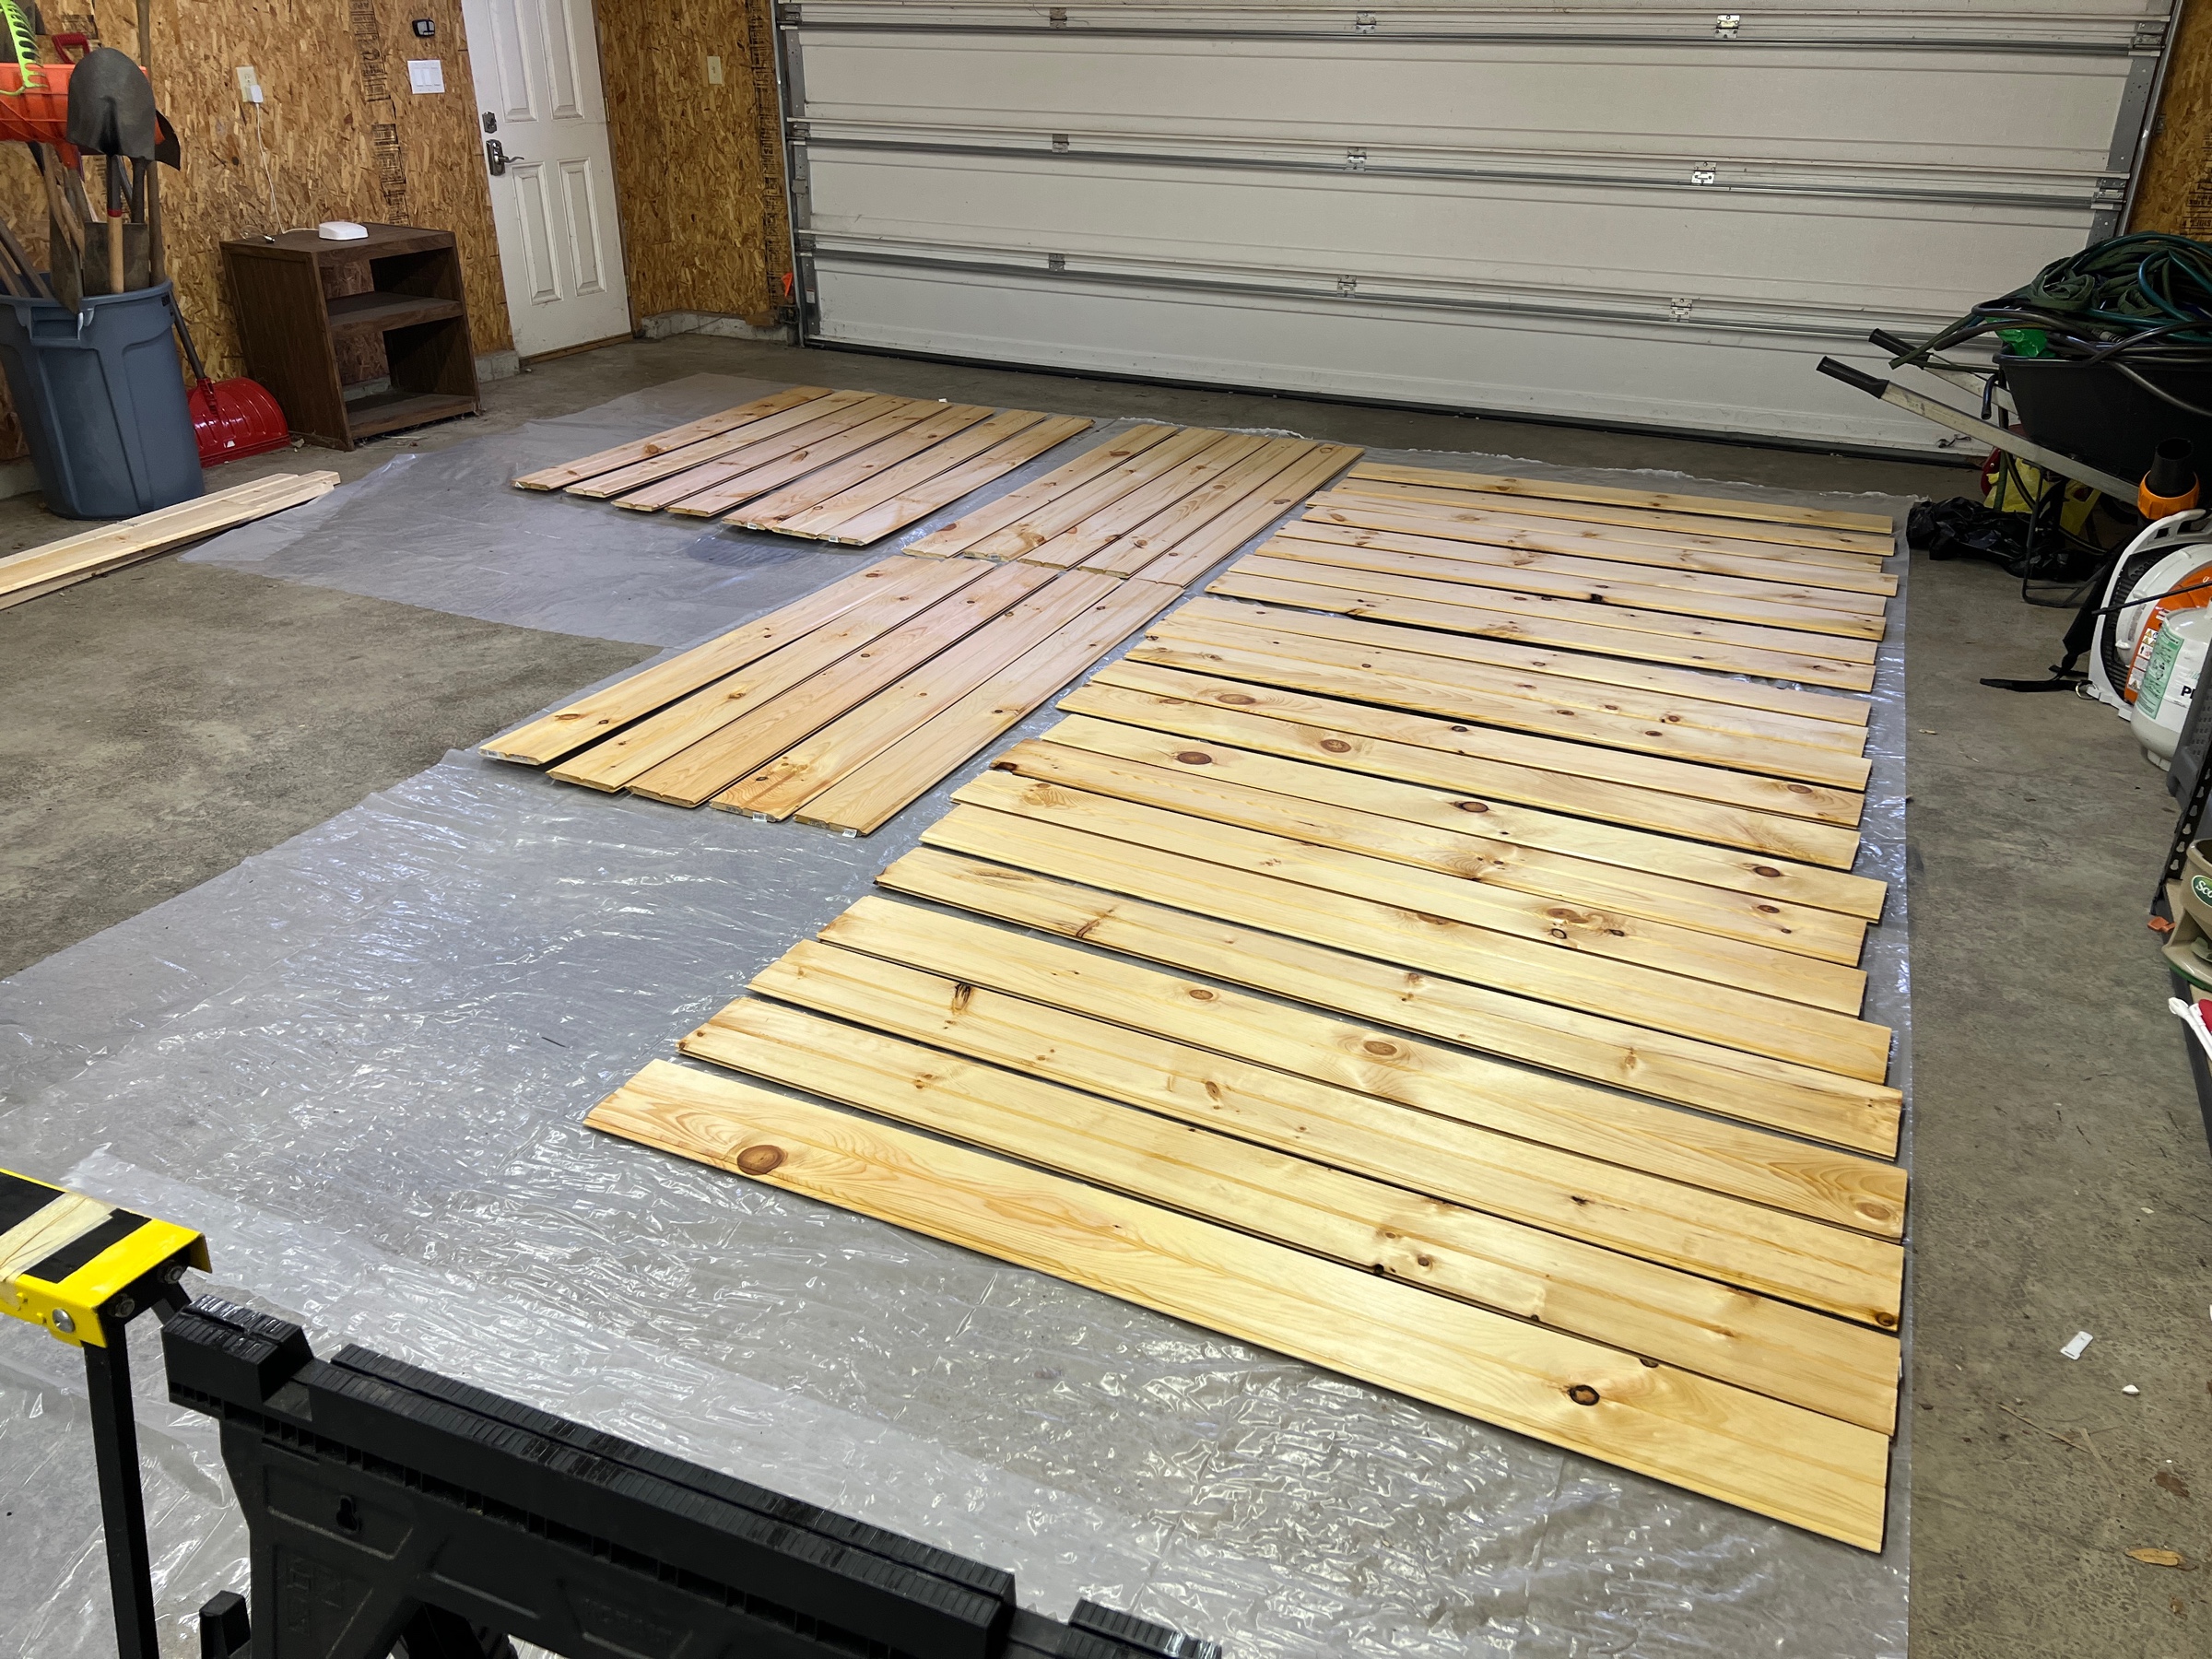 Tongue-and-groove pine boards spread out on the garage floor, drying